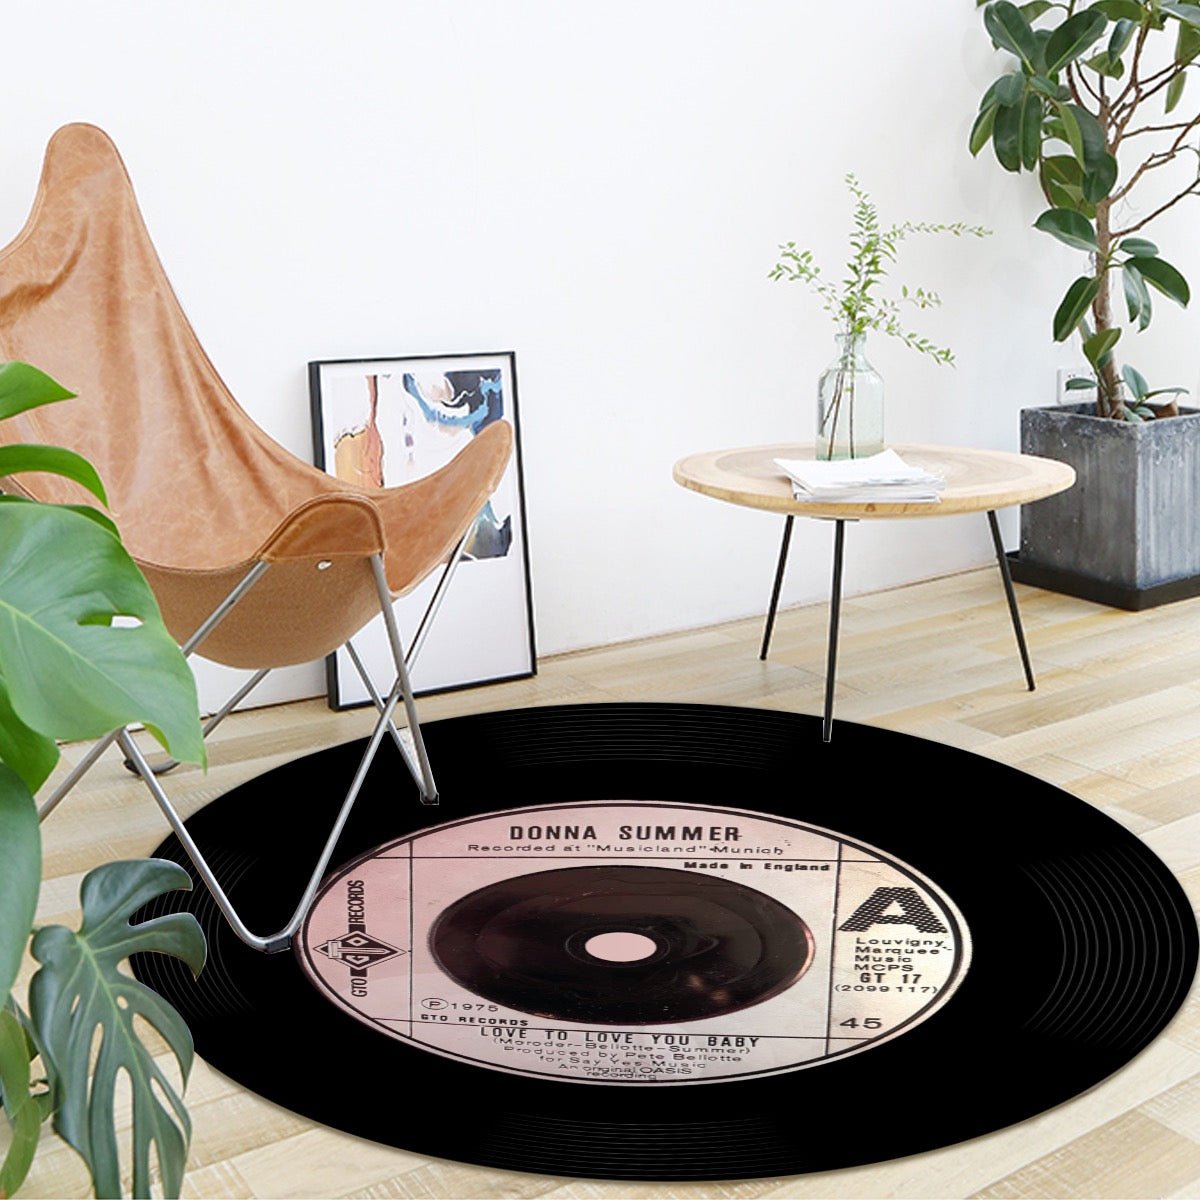 Donna Summer, Love to Love You Baby, Vinyl Record Mat (Can also be used as sound damper on wall) - Posterify